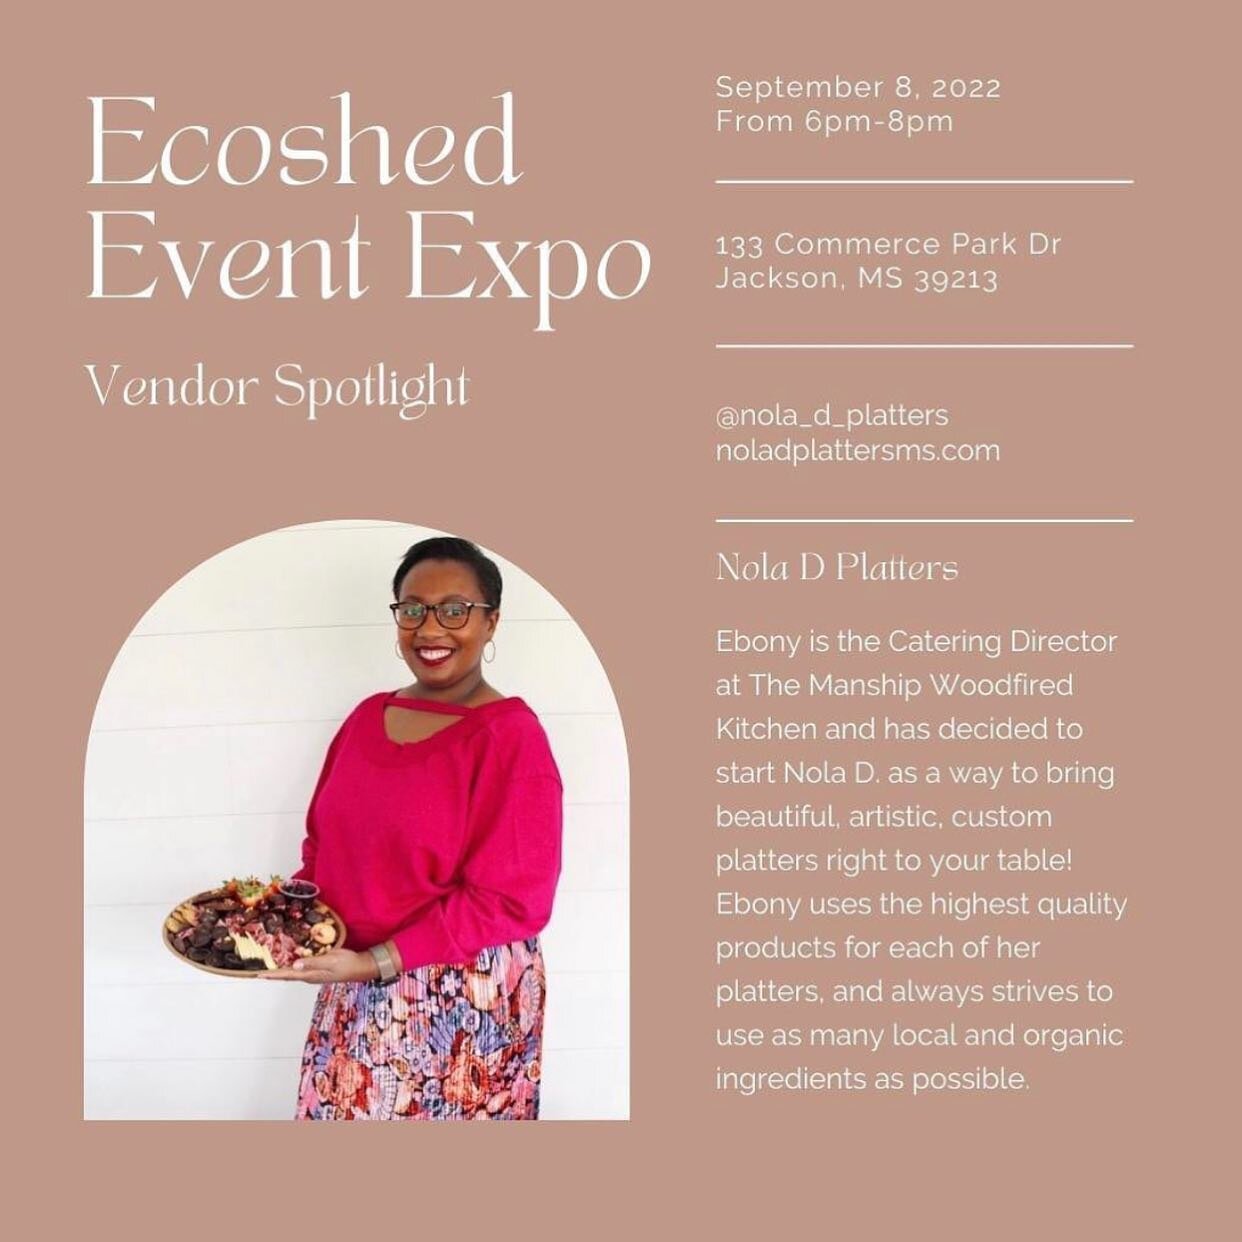 Come see #NolaDPlatters tonight at Ecoshed&rsquo;s Event Expo event! We would love for you to get a taste of what we have to offer!